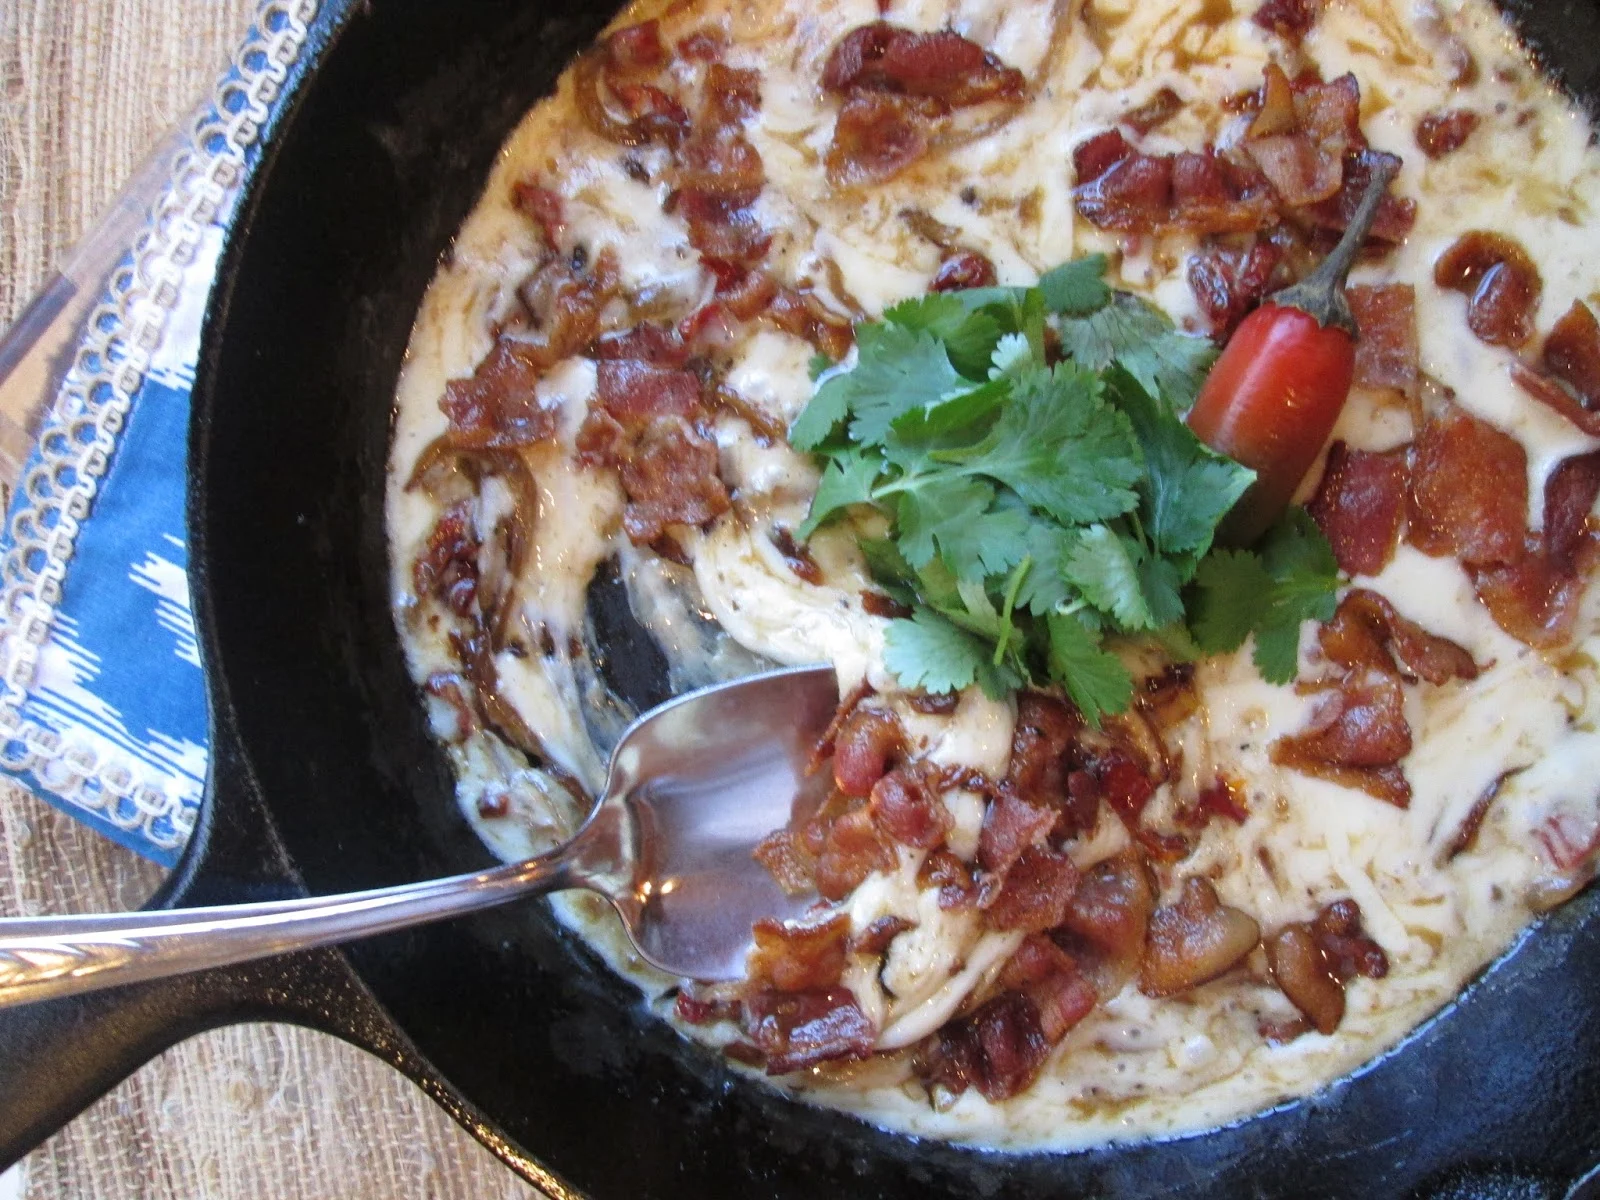 Bacon and Chile Queso Fundido